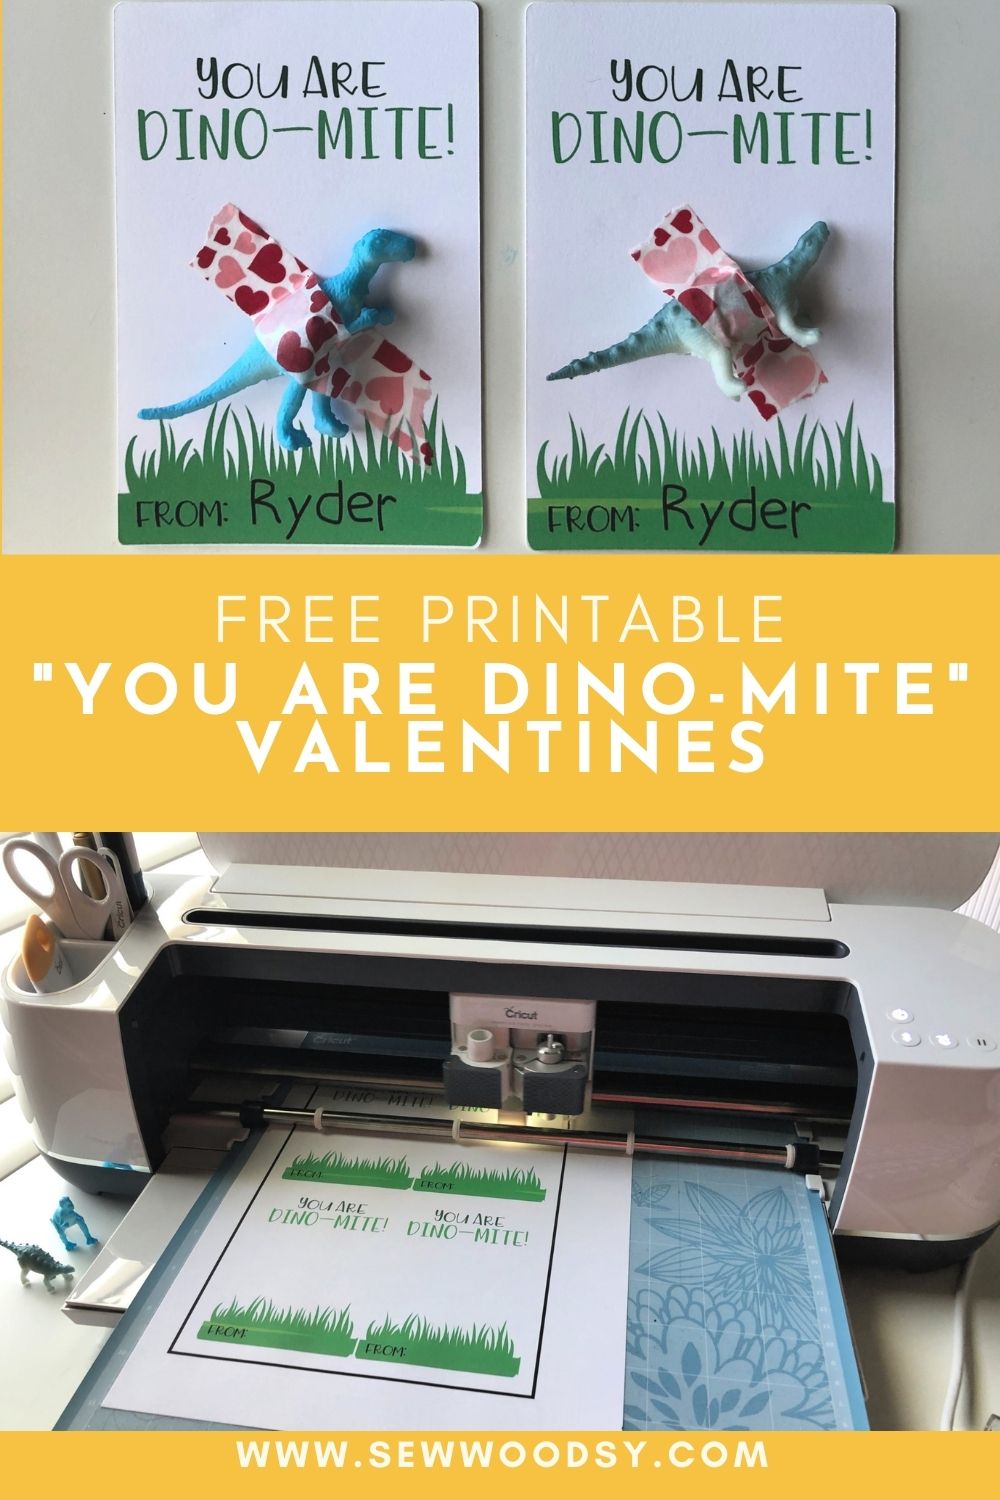 Two photos; top of two dinosaur valentines and bottom of cricut cutting the valentines with post title text on image for Pinterest.